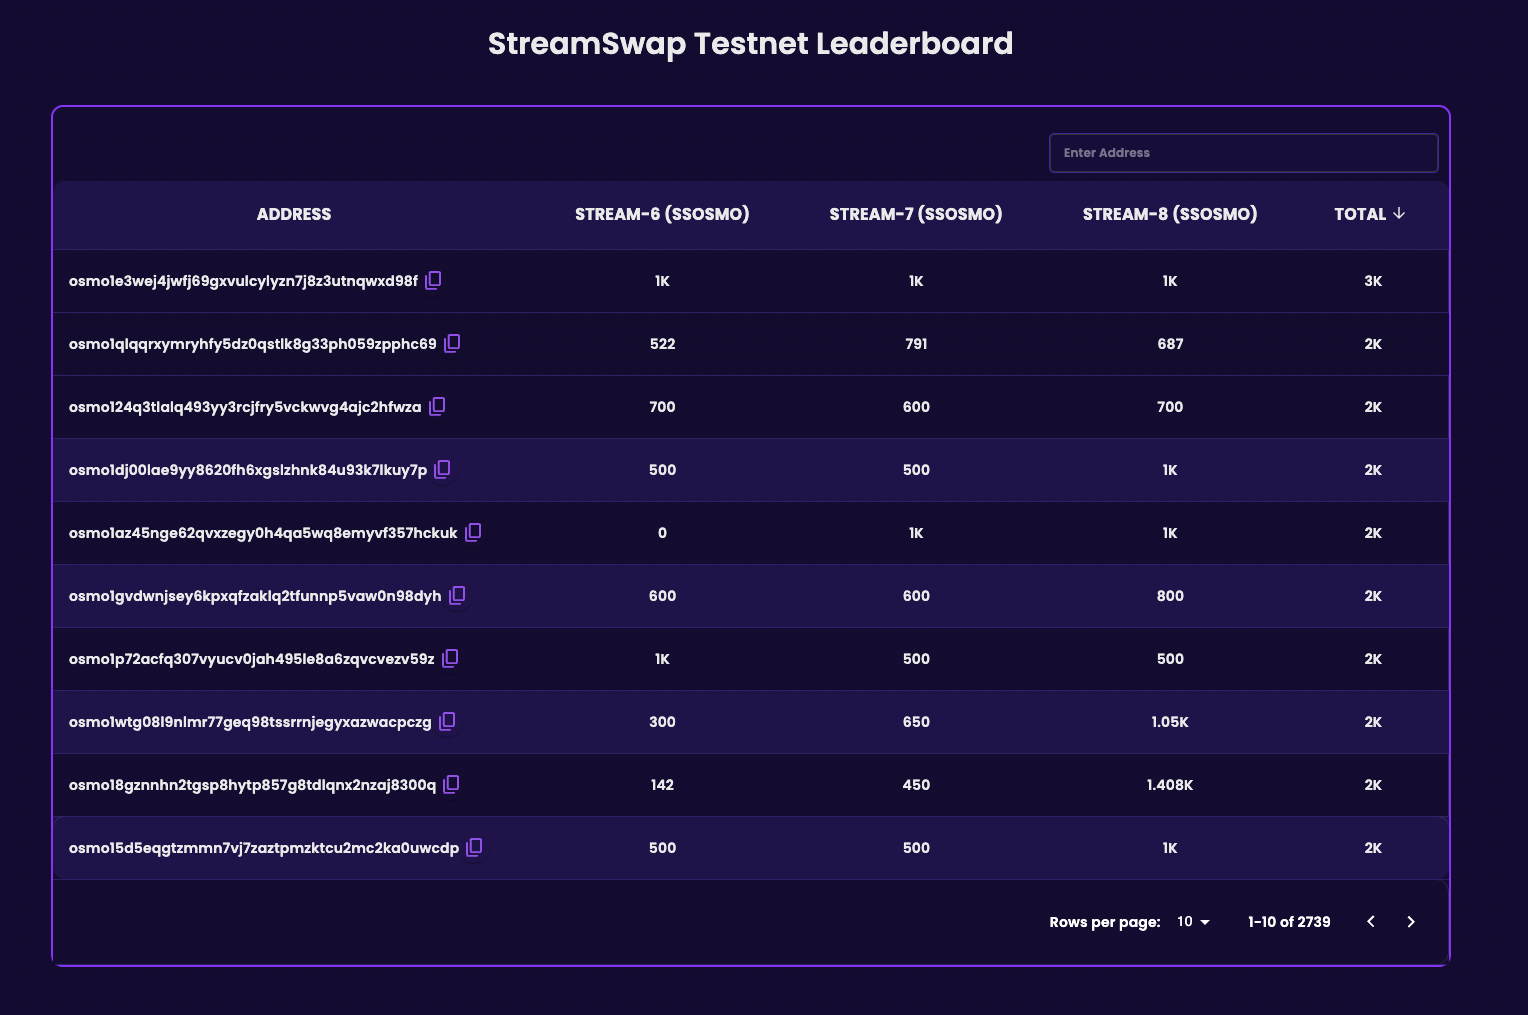 Preview of the StreamSwap Testnet leaderboard with participation from 2739 accounts. Not all will be eligible as the rules stated clearly that each account should spend between 100 and 1000 OSMO to acquire FLIX